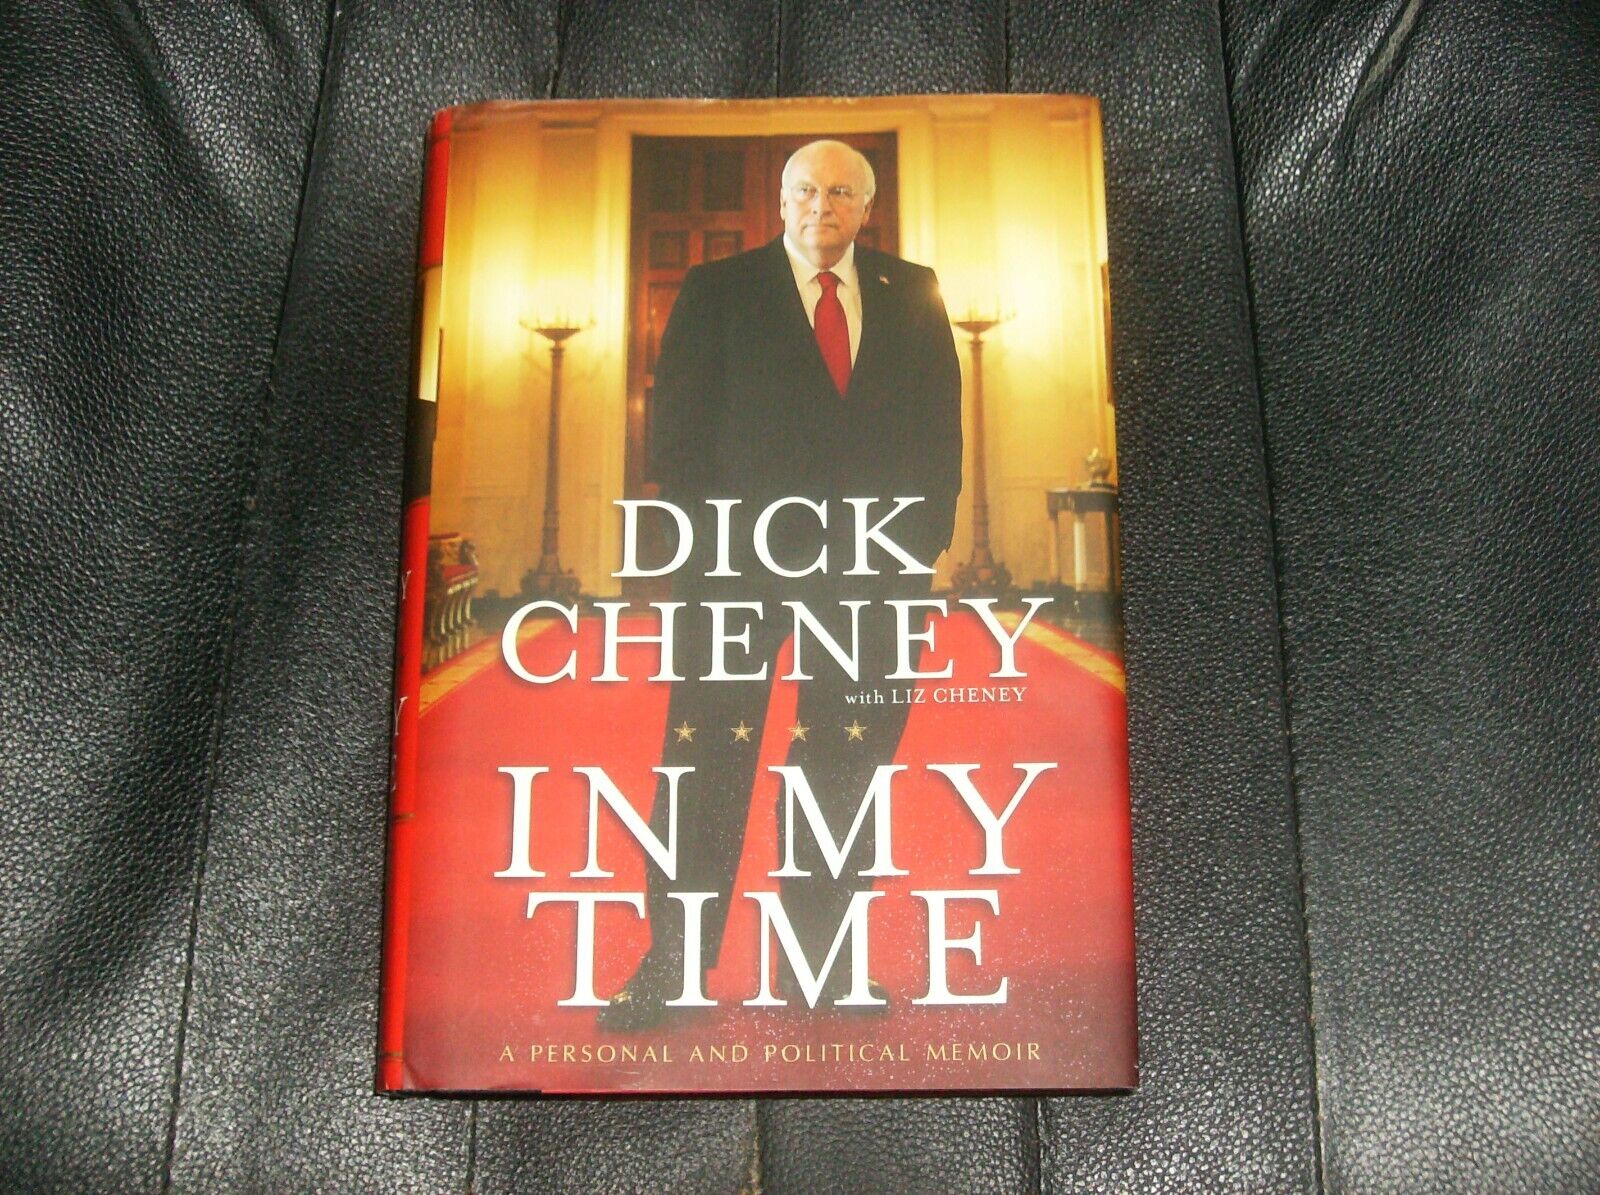 DICK CHENEY SIGNED BOOK. IN MY TIME.